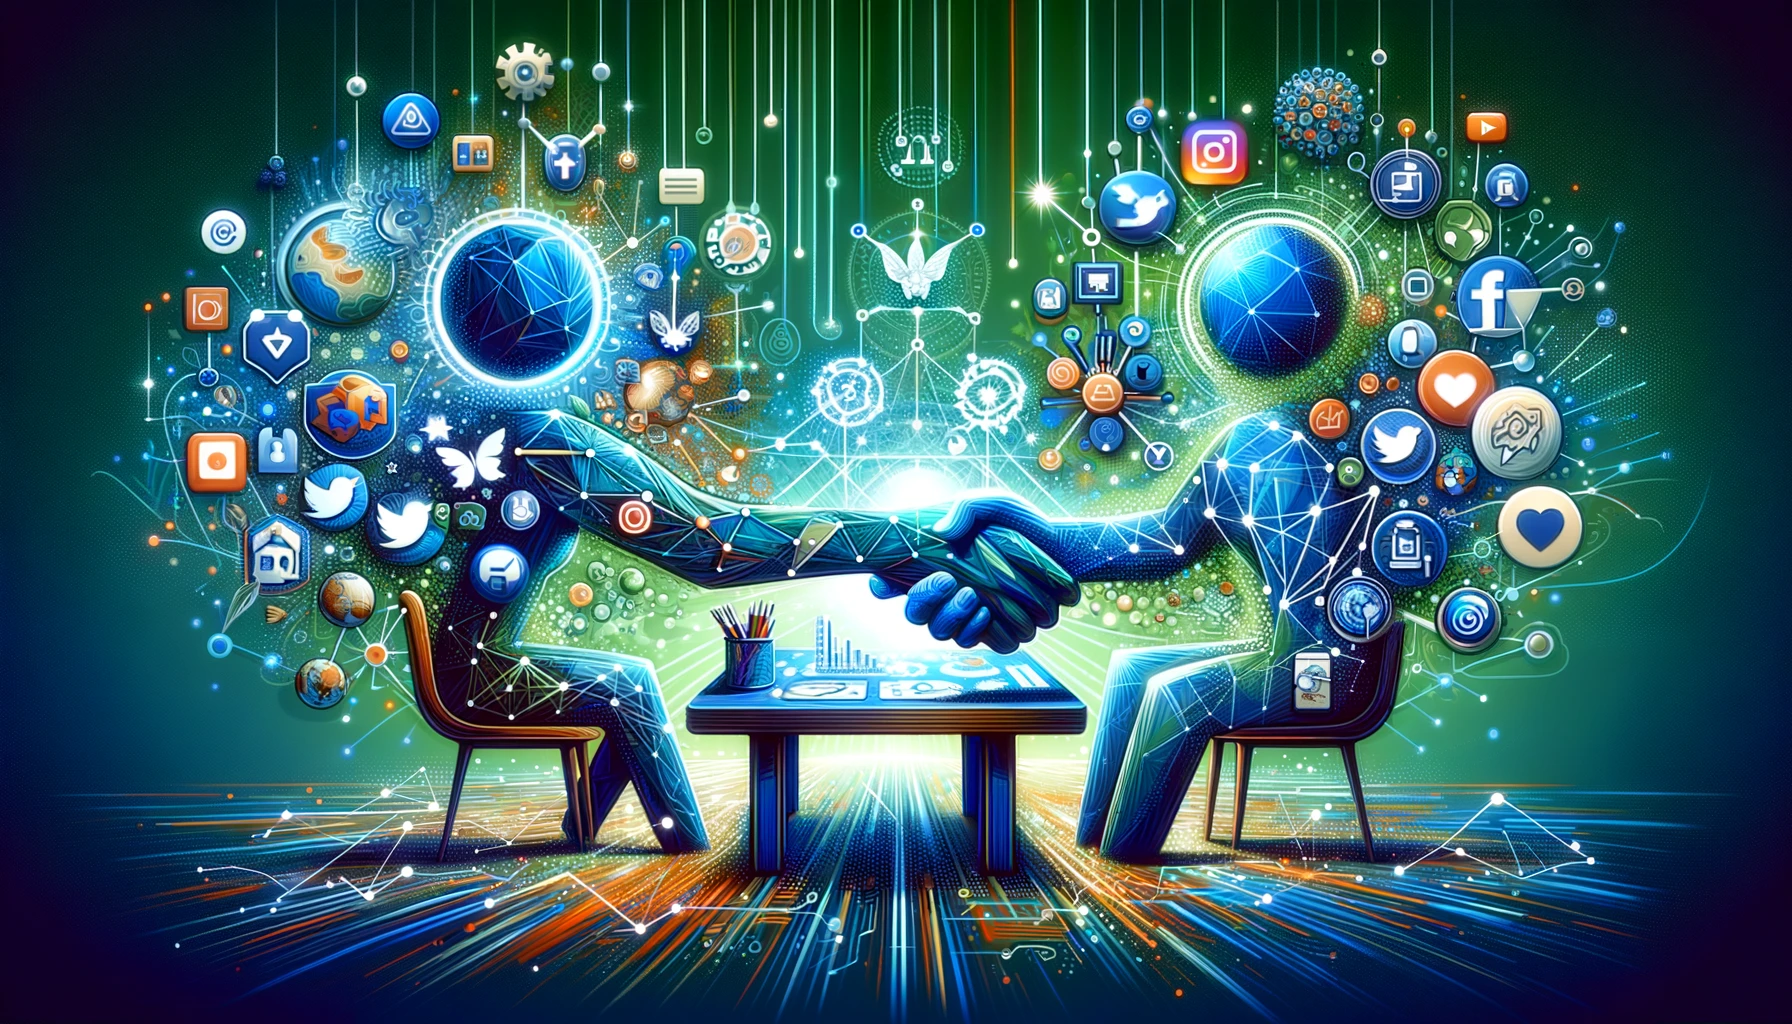 Illustration of Brand-Influencer Partnerships, showing two abstract figures shaking hands over a digital marketing backdrop, symbolizing collaboration and digital reach.